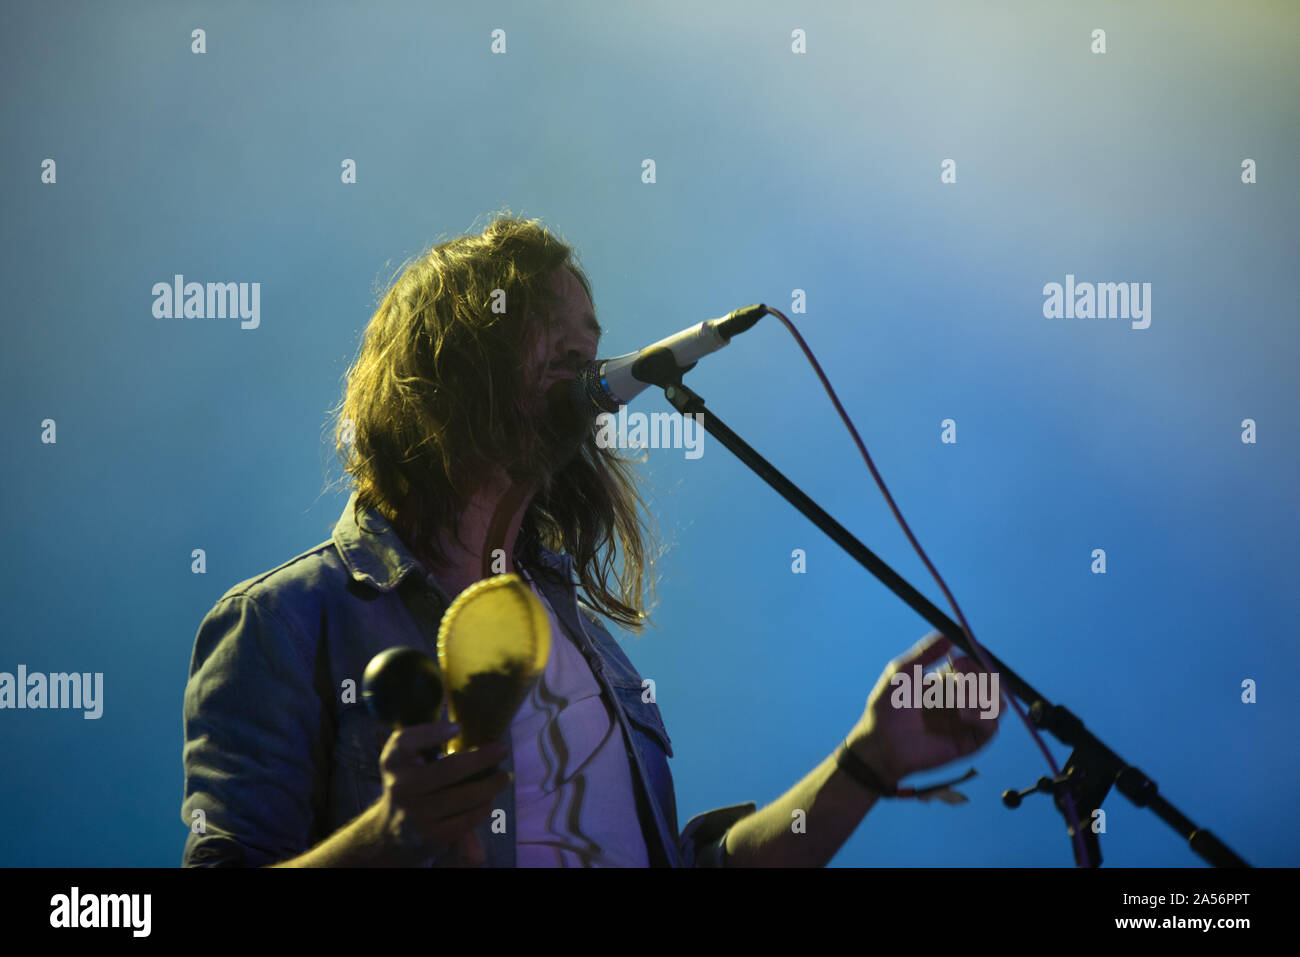 Denmark, Aarhus - June 6, 2019. The Australian musical project Tame Impala performs a live concert during the Danish music festival Northside 2019 in Aarhus. Here guitarist and musician Kevin Parker is seen live on stage. (Photo credit: Gonzales Photo - Joe Miller). Stock Photo